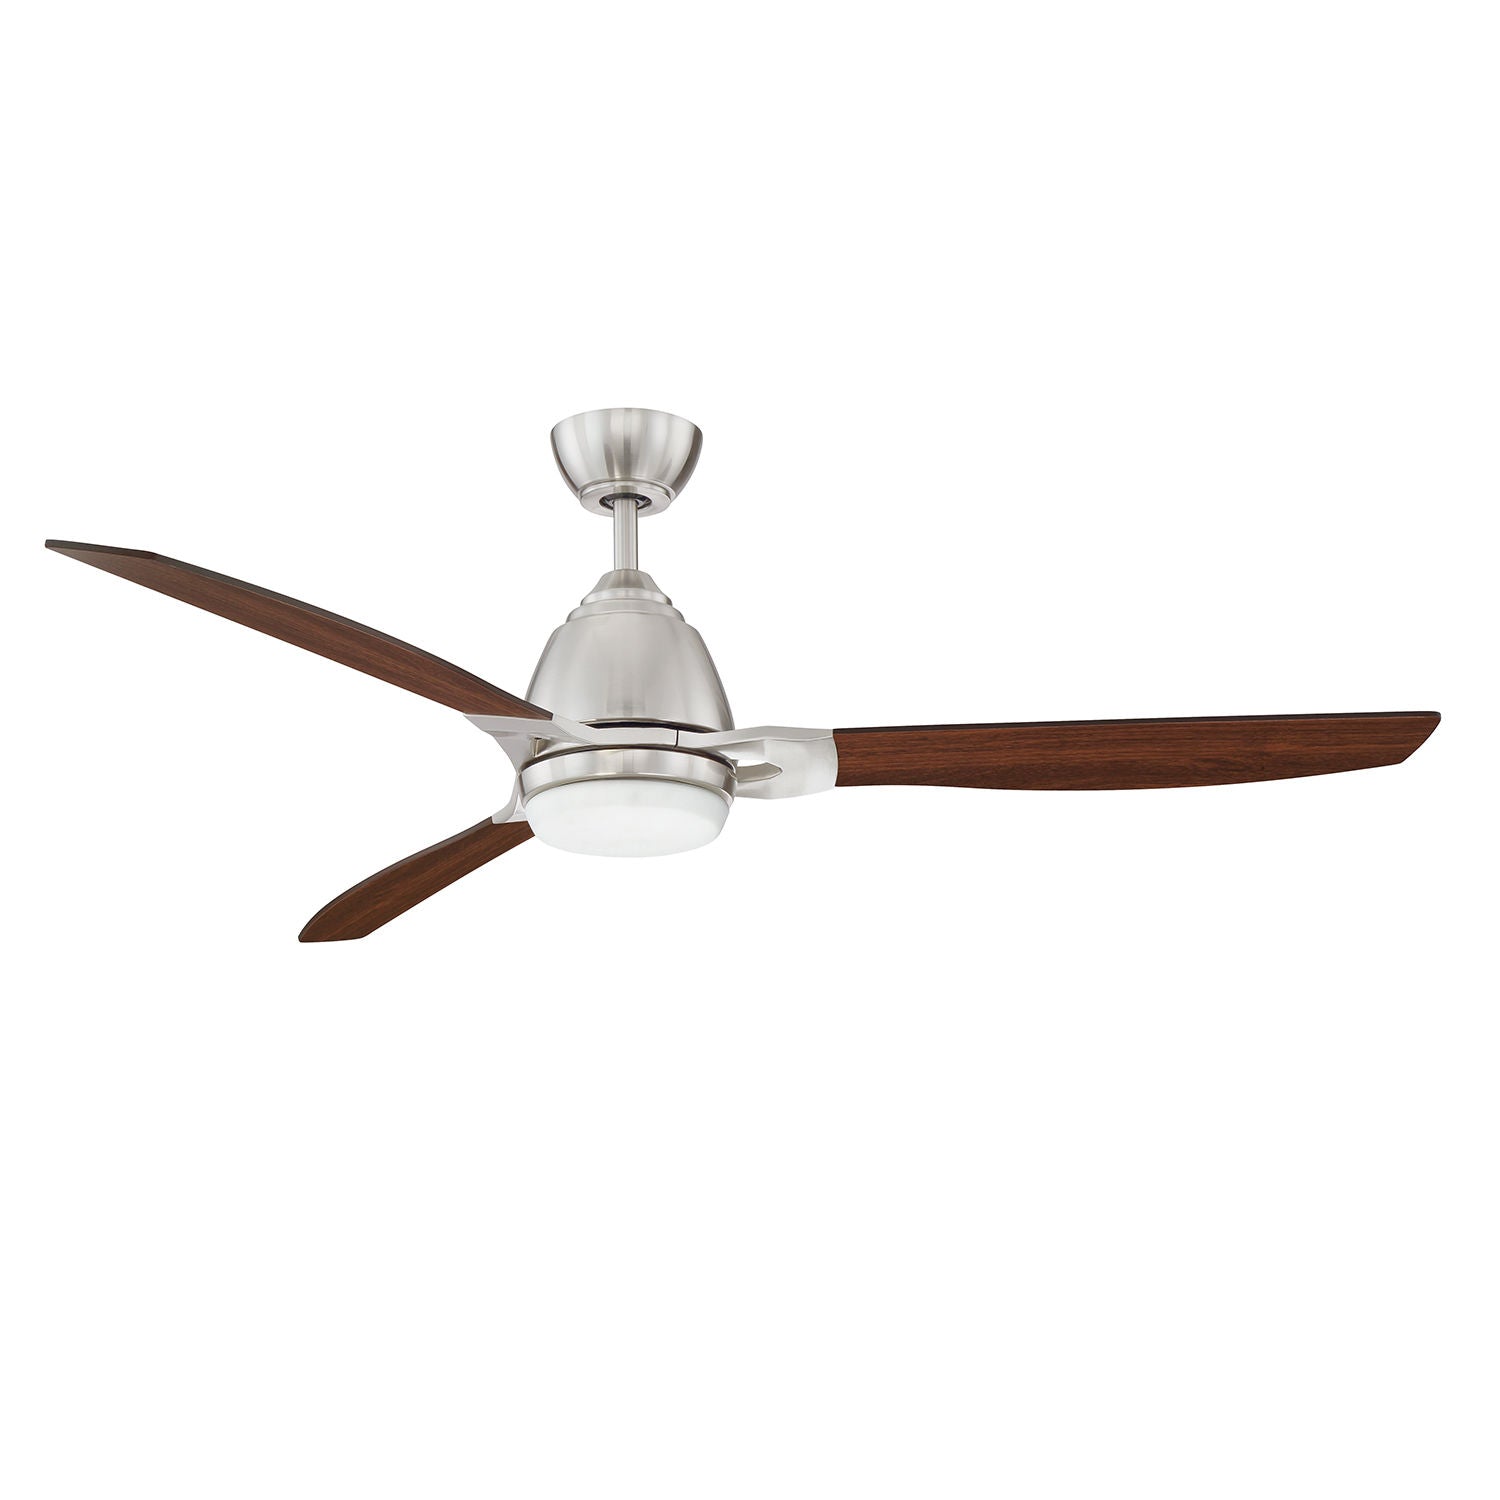 ERIS Ceiling fan Stainless steel INTEGRATED LED - AC21852-SN | KENDAL